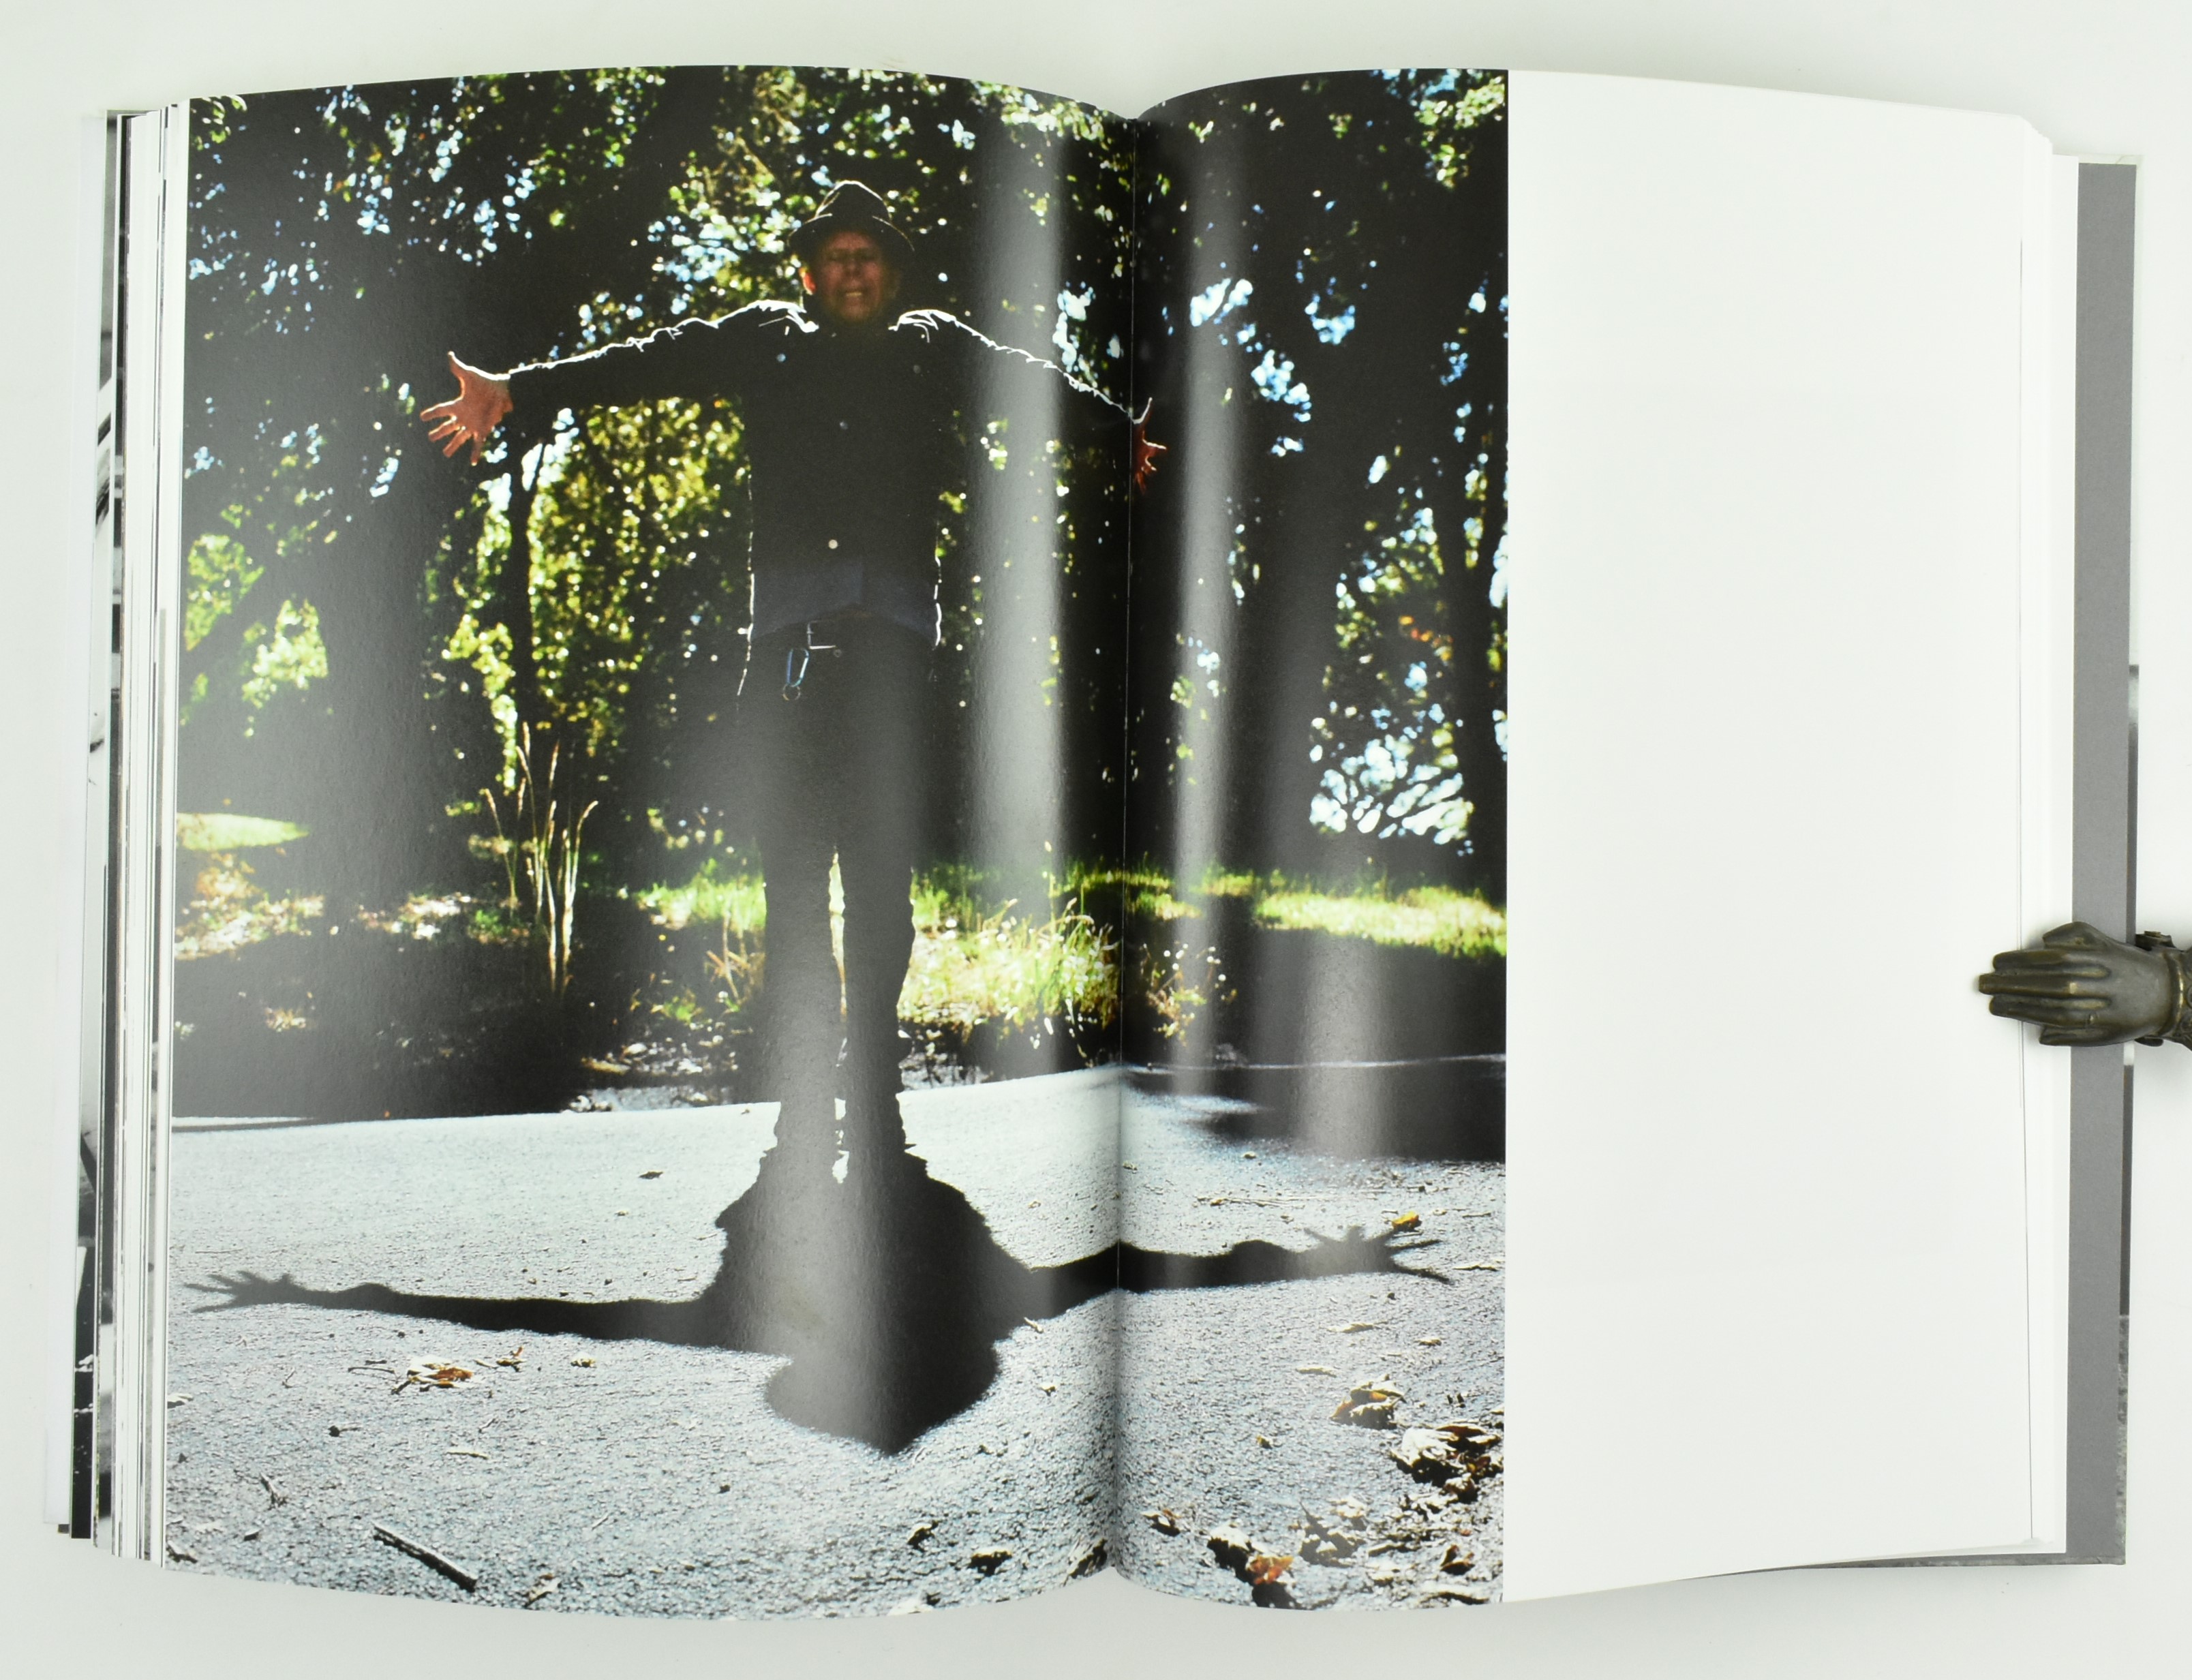 WAITS BY CORBIJN. LIMITED EDITION ON TOM WAITS IN SLIPCASE - Image 6 of 7